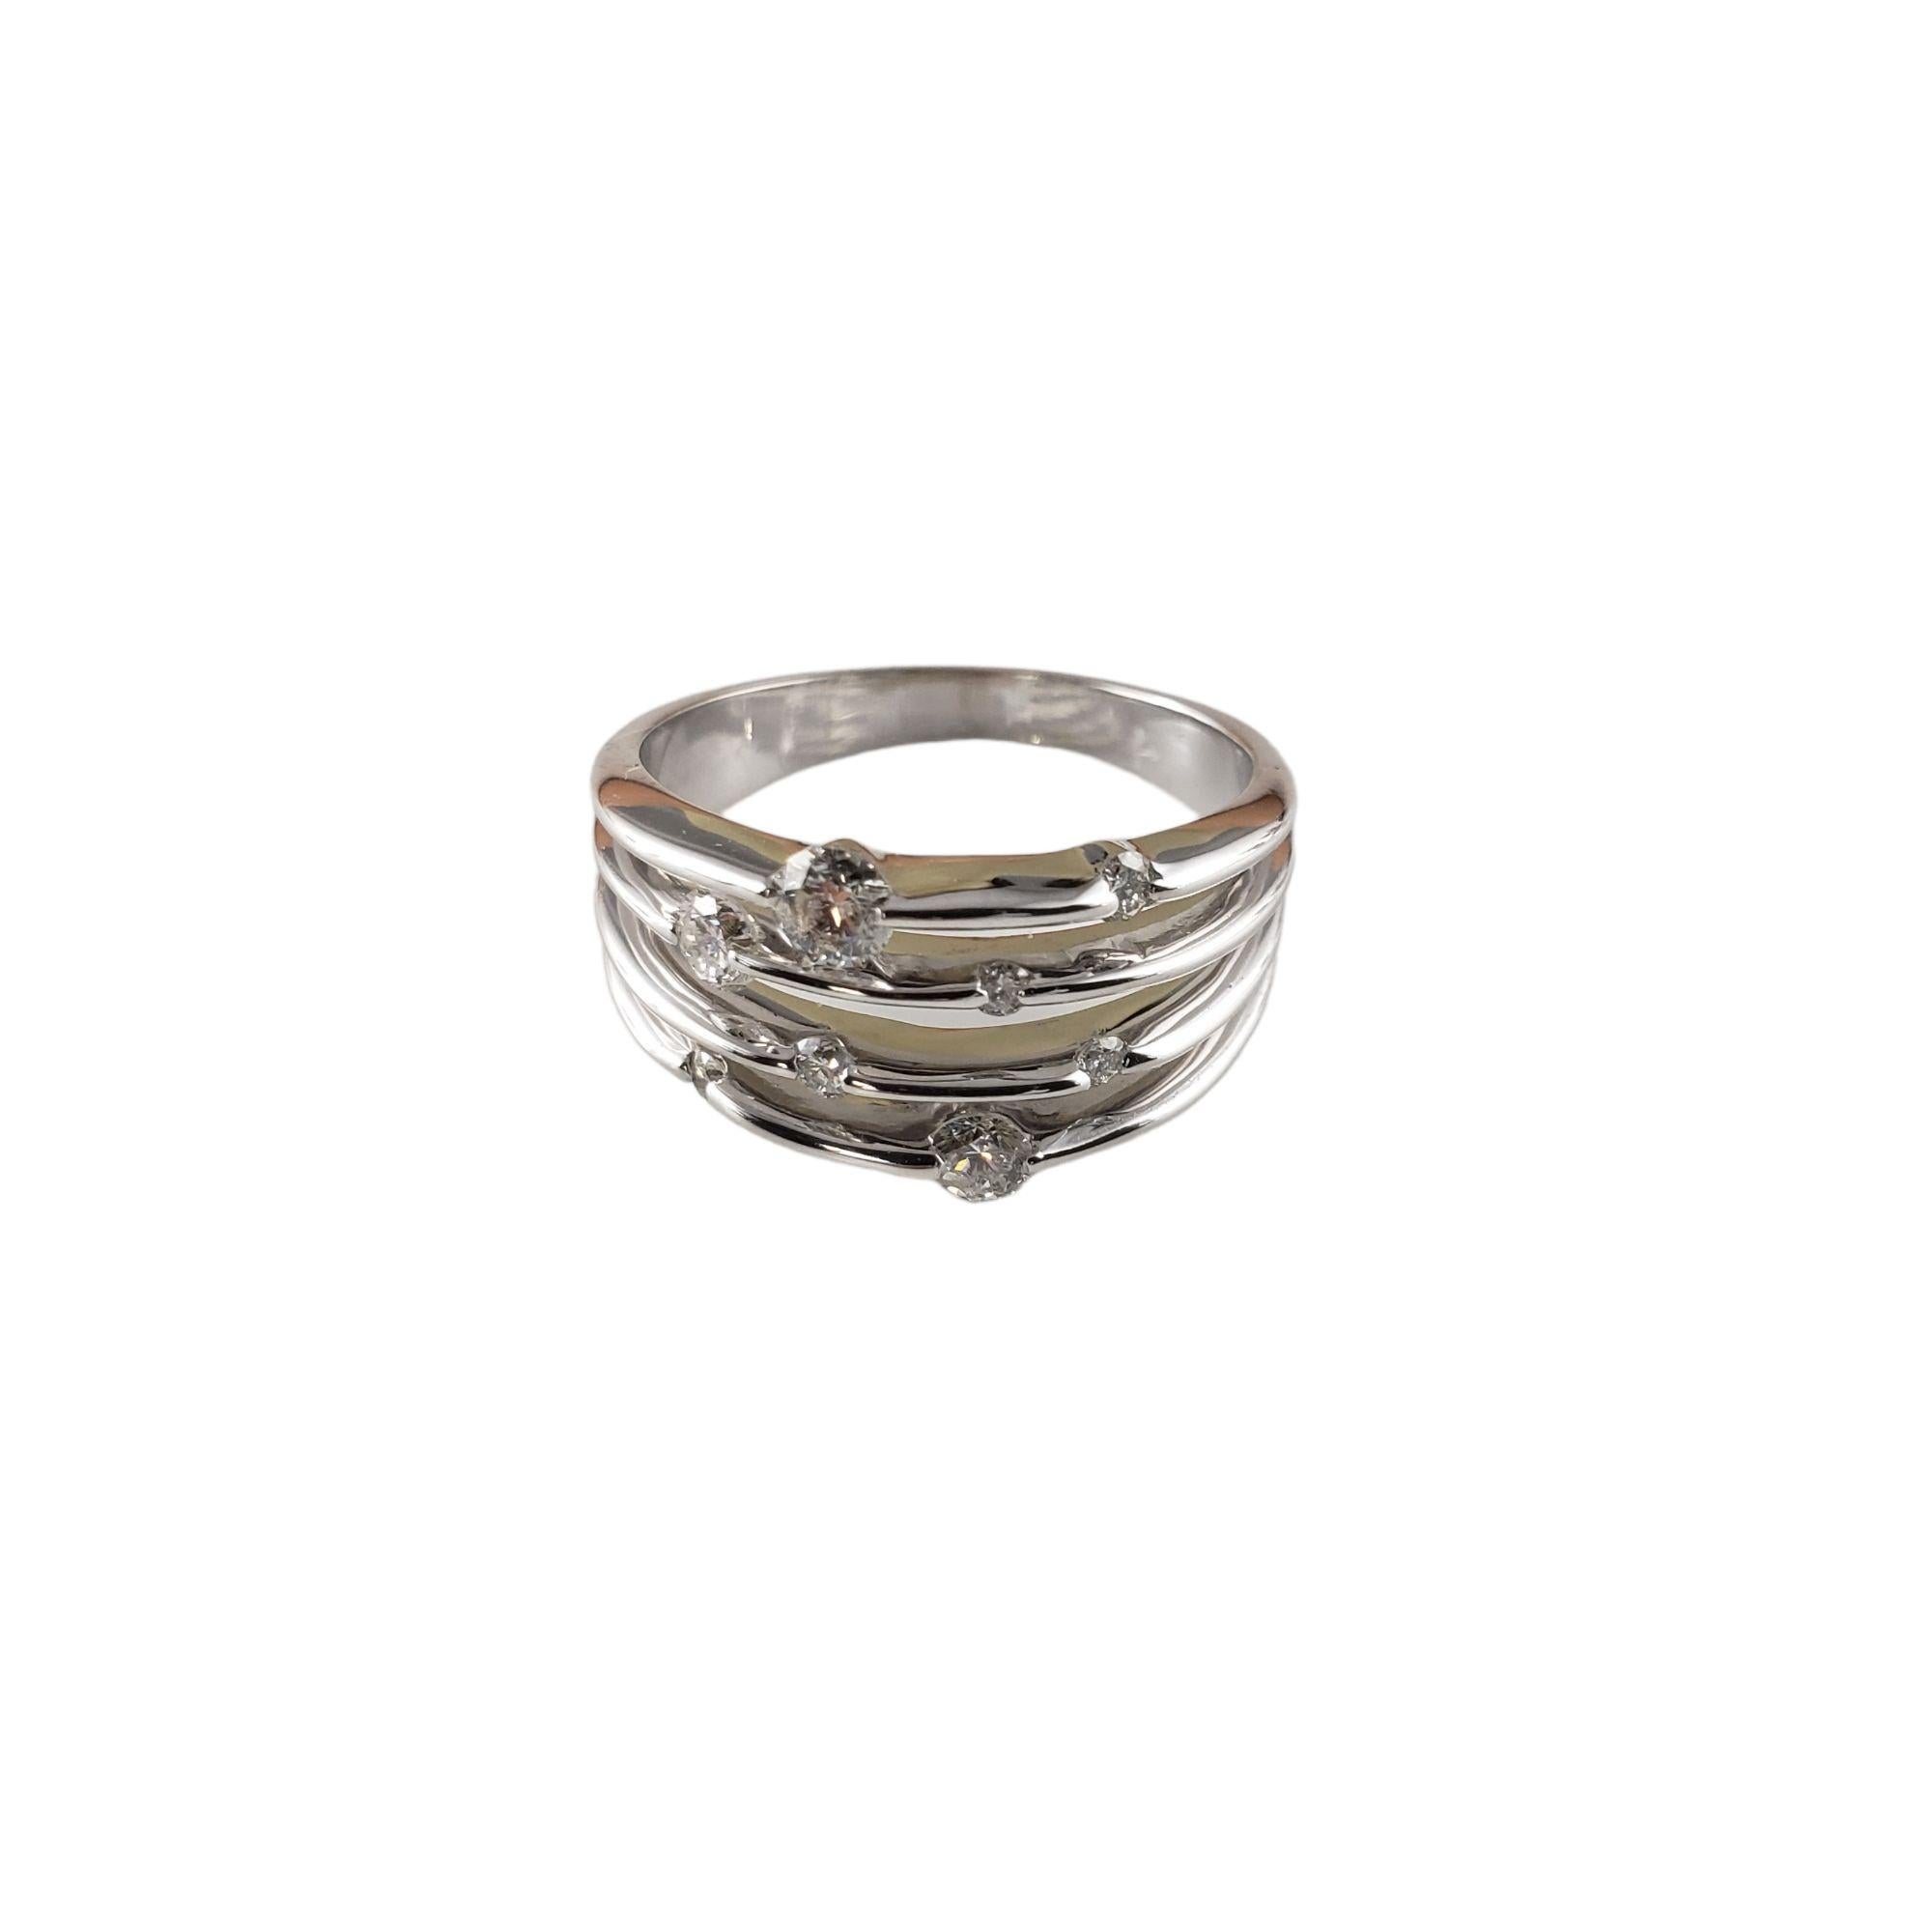 Vintage 14 Karat White Gold and Diamond Band Ring Size 10-

This lovely fixed four band ring features eight round brilliant cut diamonds set in classic 14K white gold.  Width:  12 mm.  Shank: 3 mm.

Approximate total diamond weight:   .50